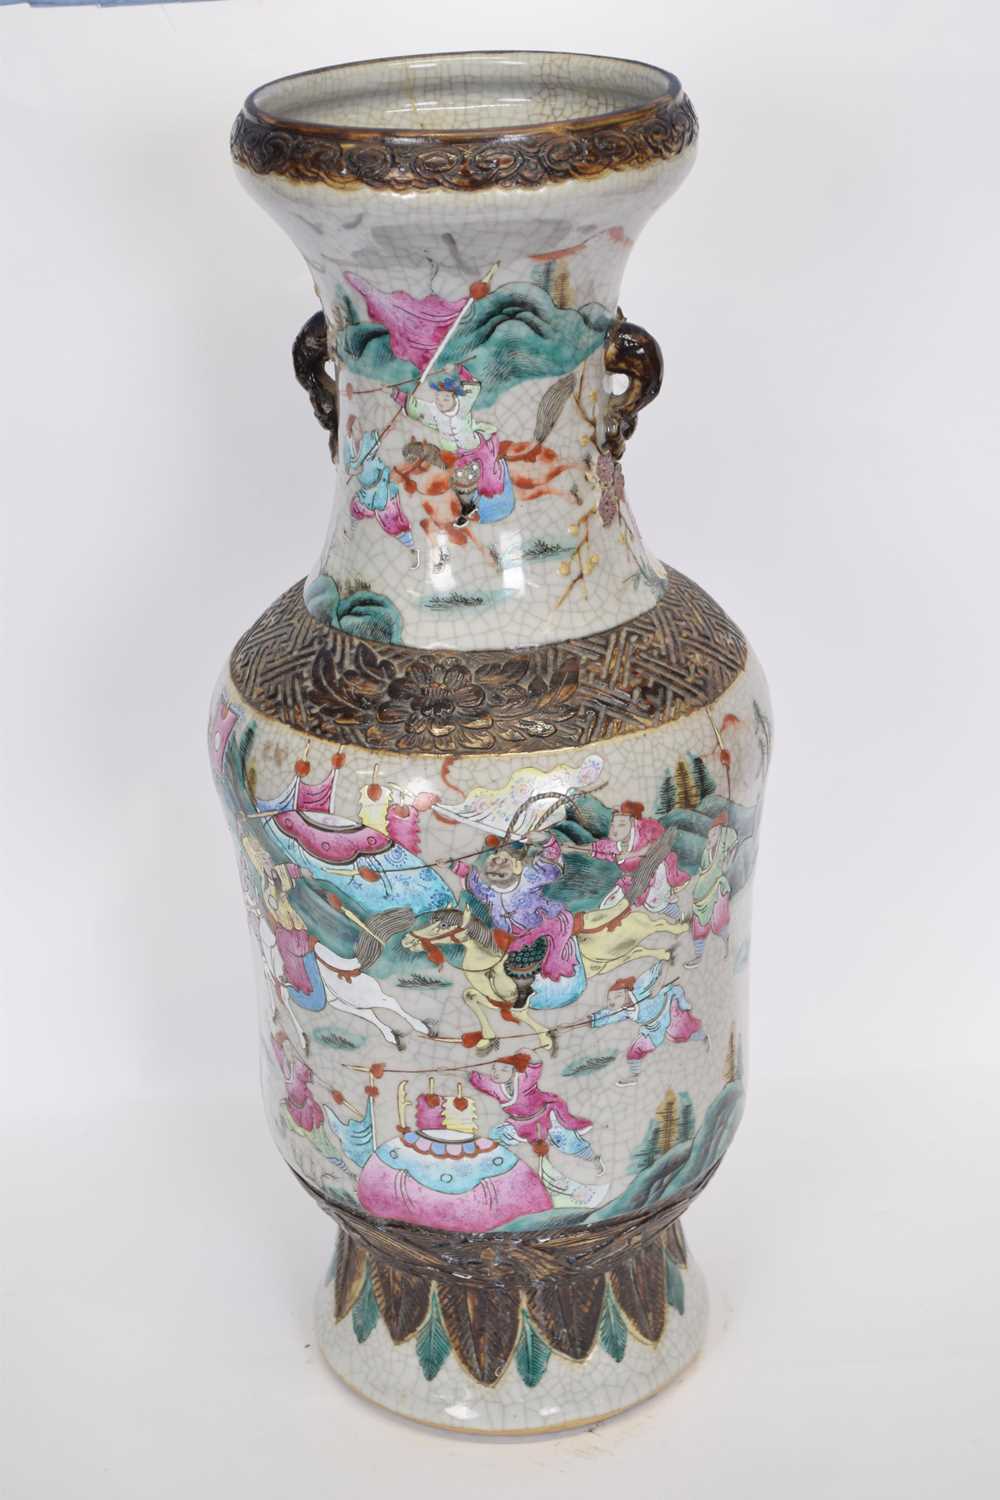 Chinese Crackle Ware Vase